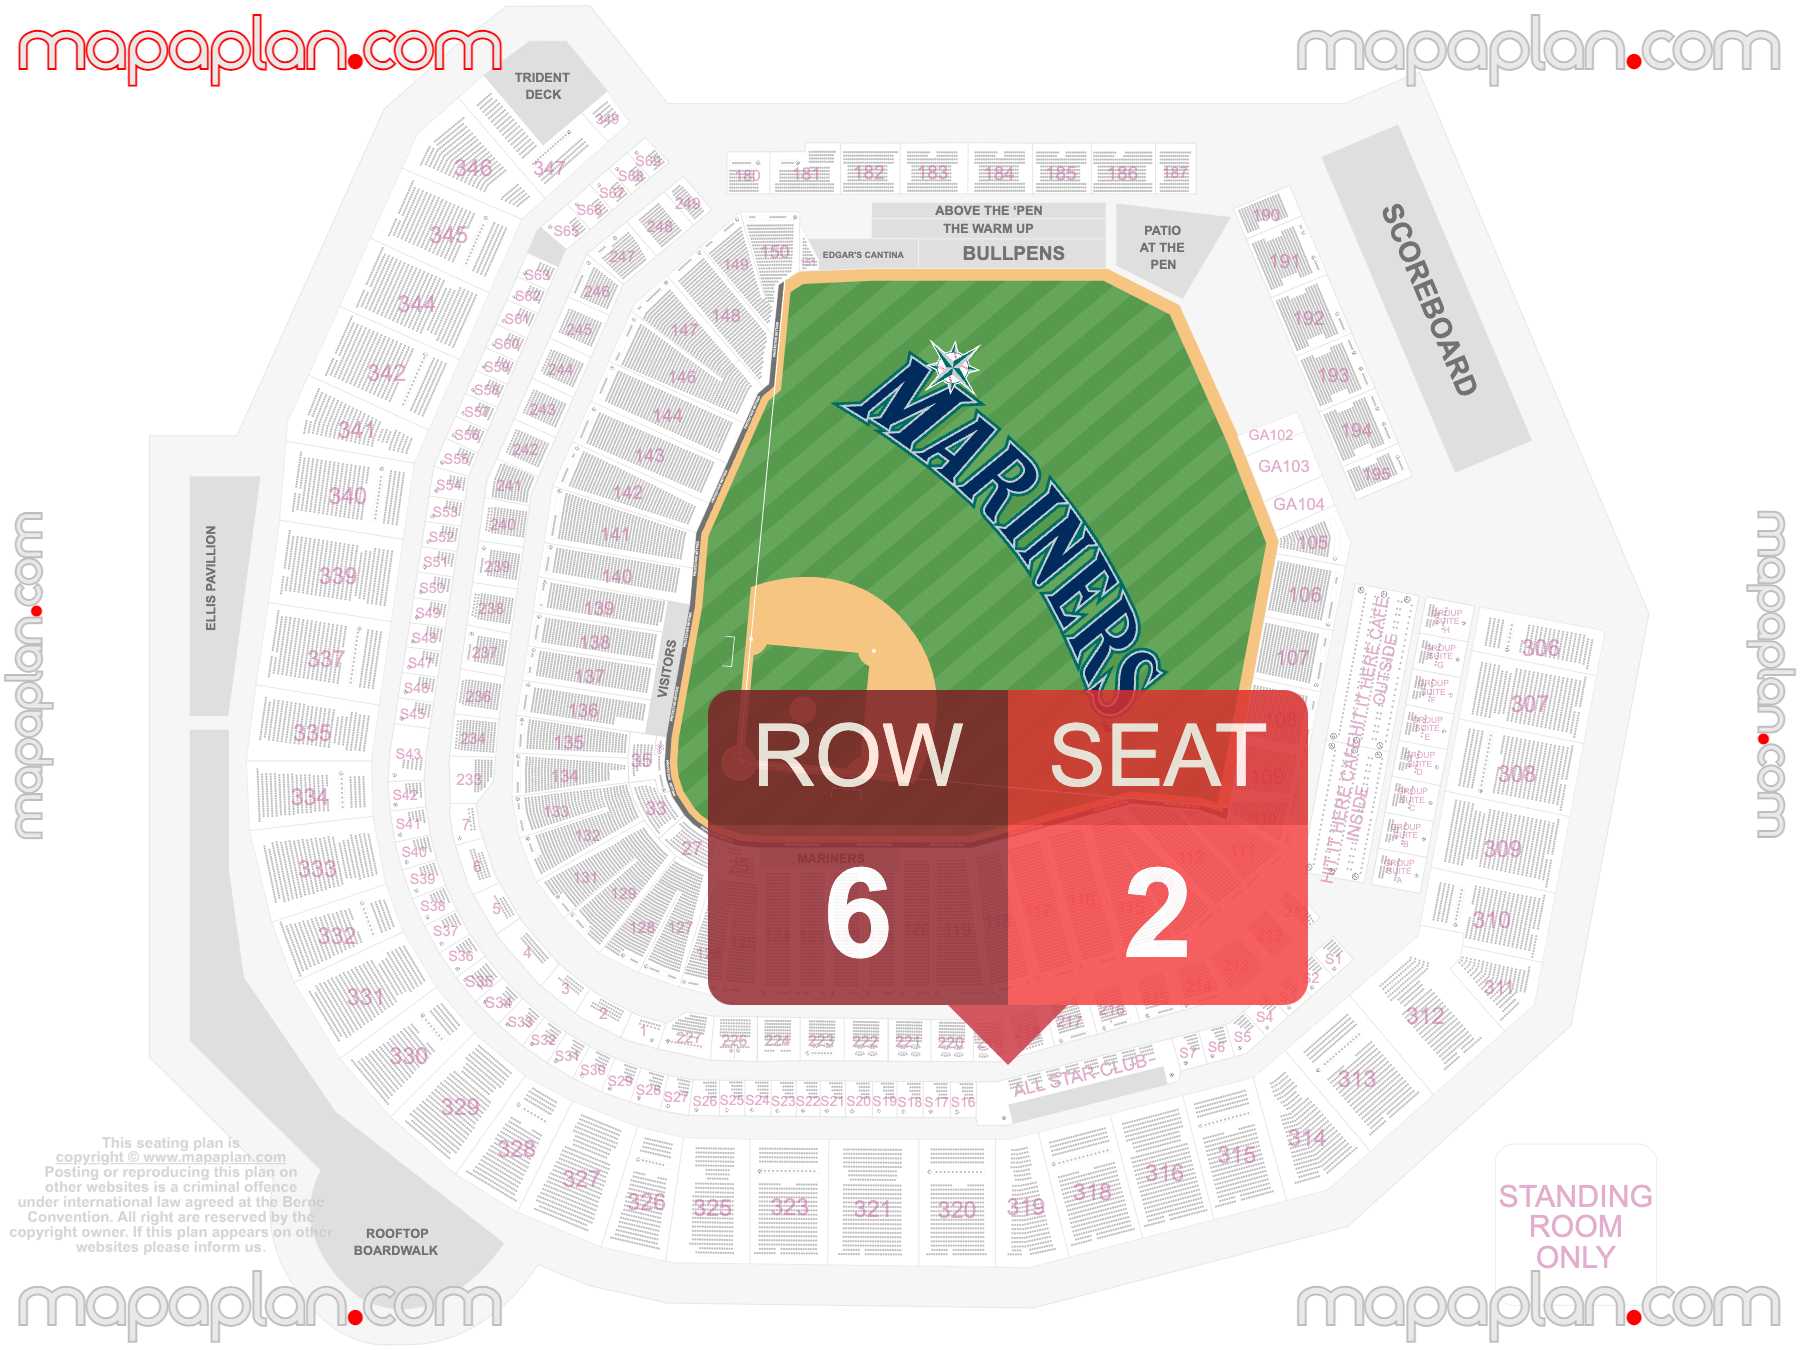 Seattle T-Mobile Park seating chart Concert & Mariners Stadium Baseball inside capacity view arrangement plan - Interactive virtual 3d best seats & rows detailed stadium image configuration layout